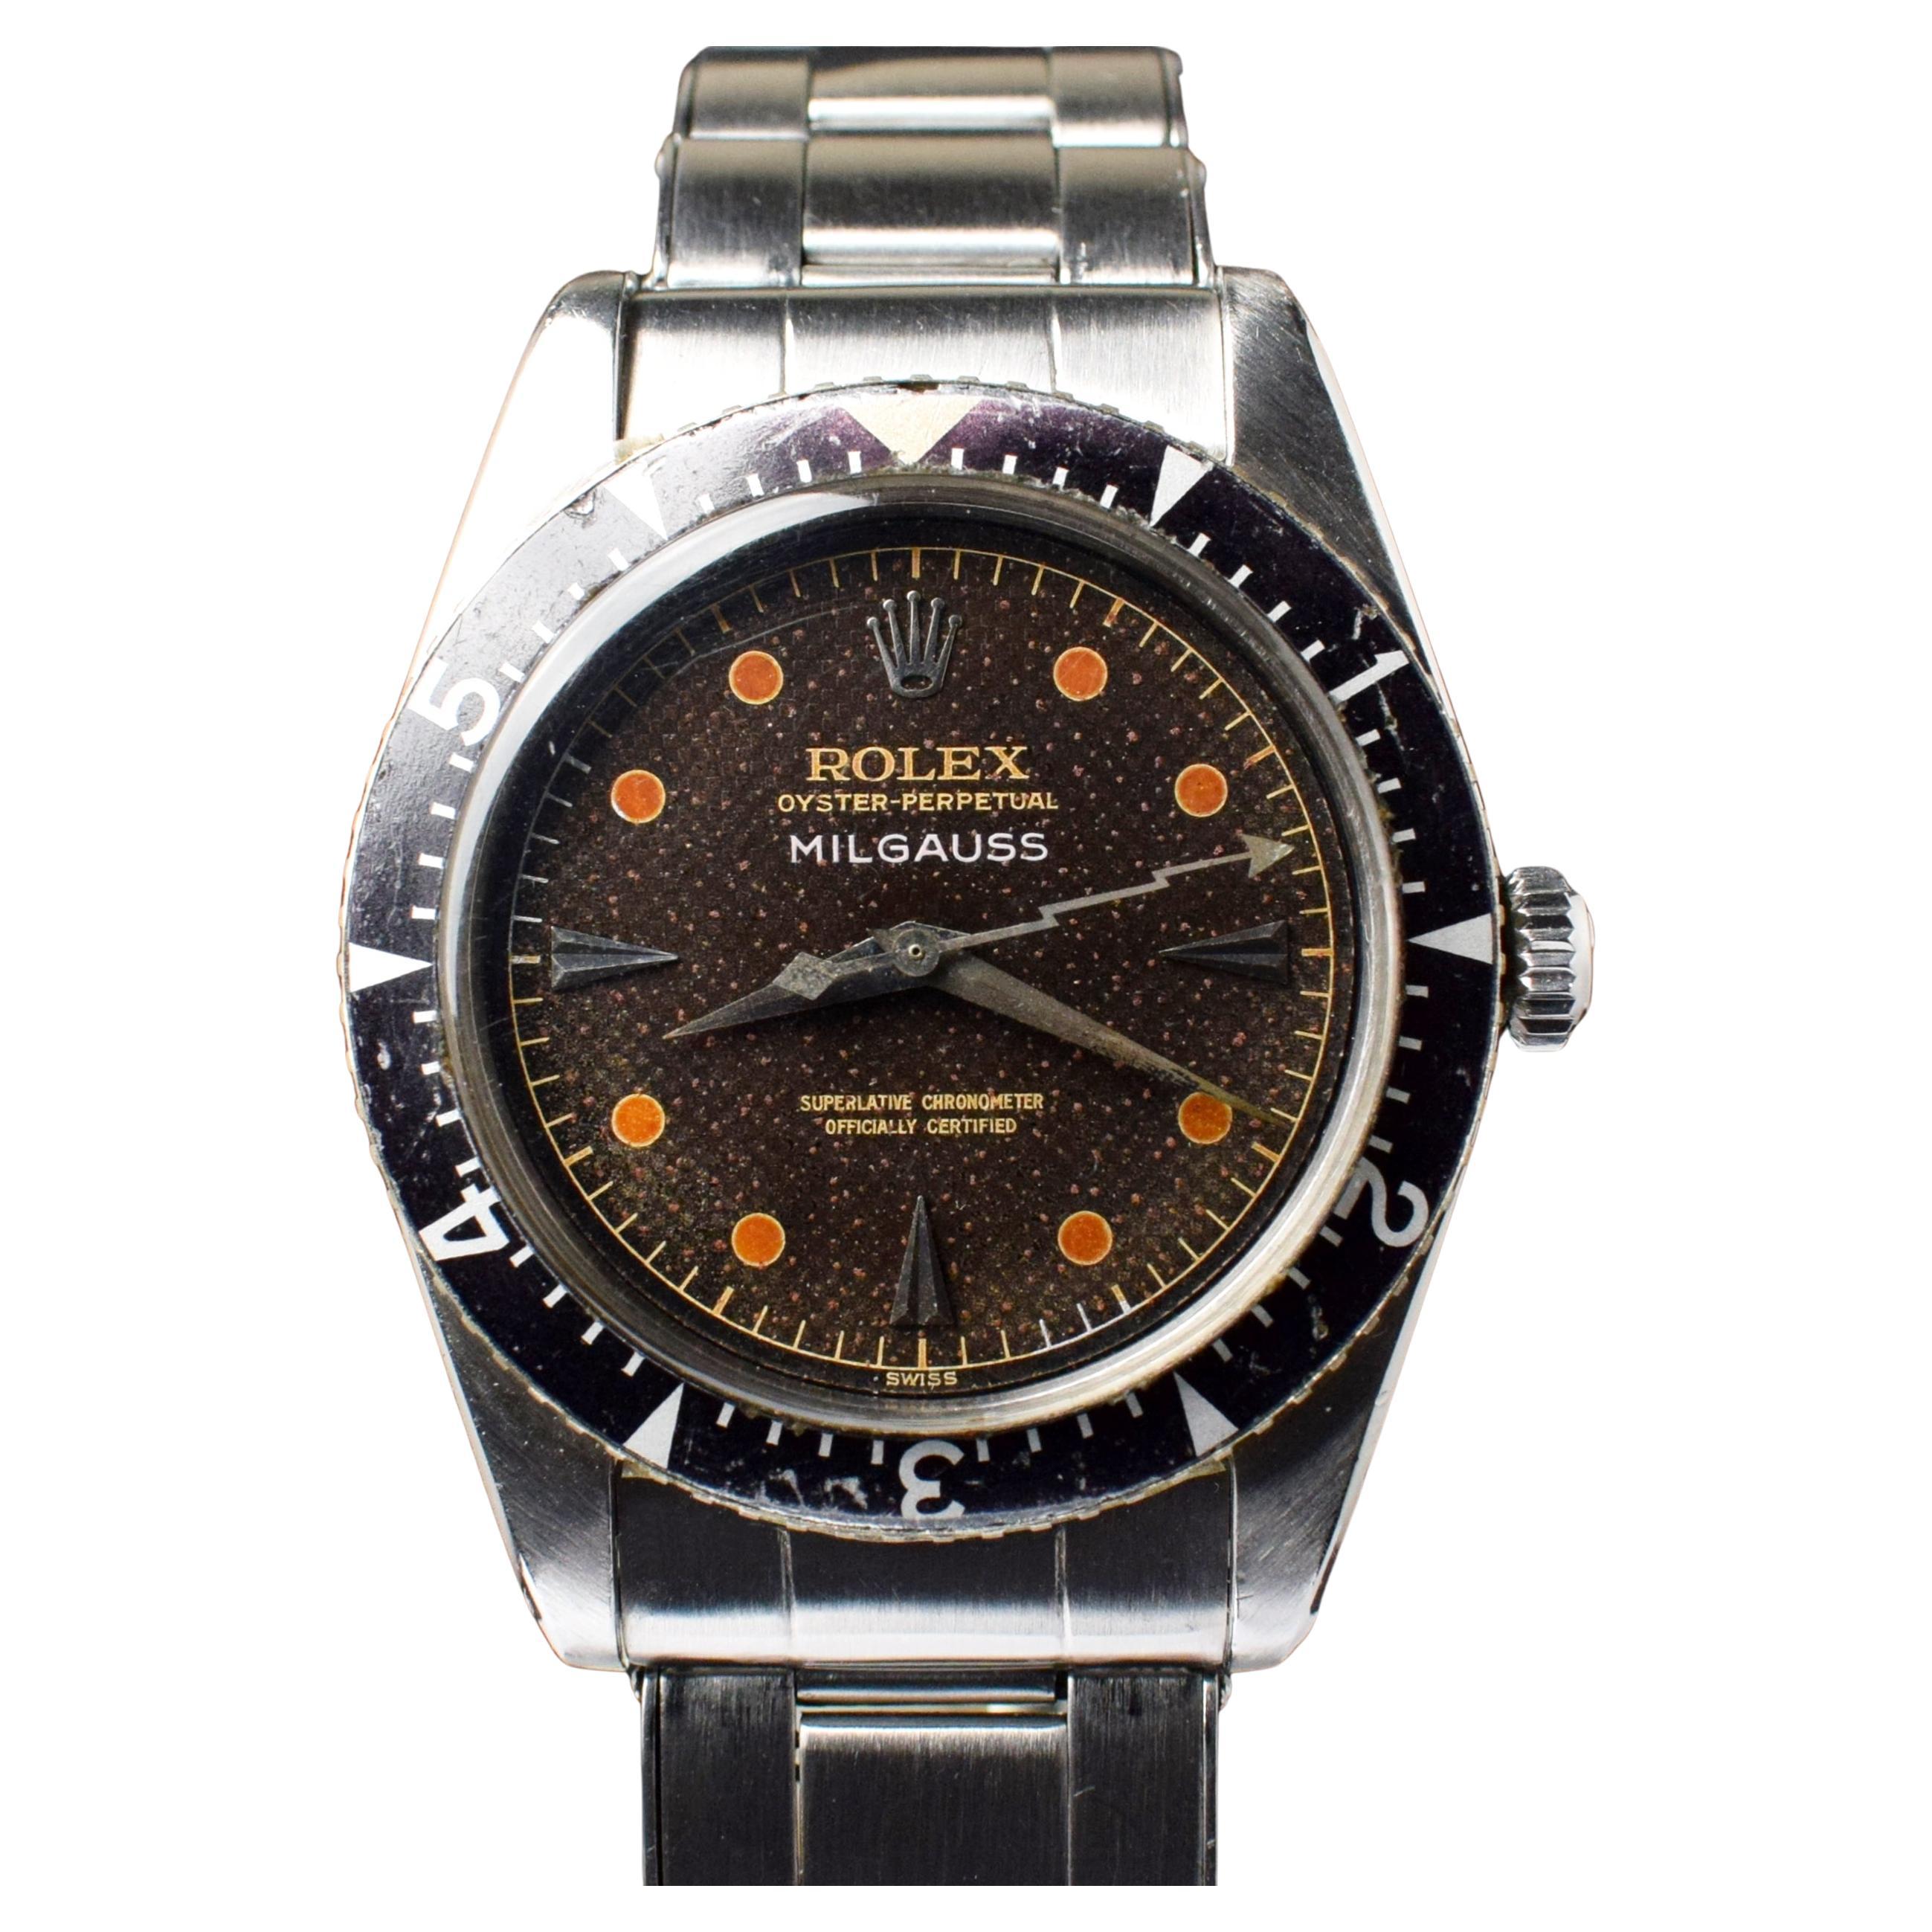 Rolex Milgauss Anti-Magnetic Tropical Honeycomb Dial 6541 Automatic Watch 1958 For Sale at 1stDibs rolex milgauss 6541, rolex milgauss 1958 rolex milgauss